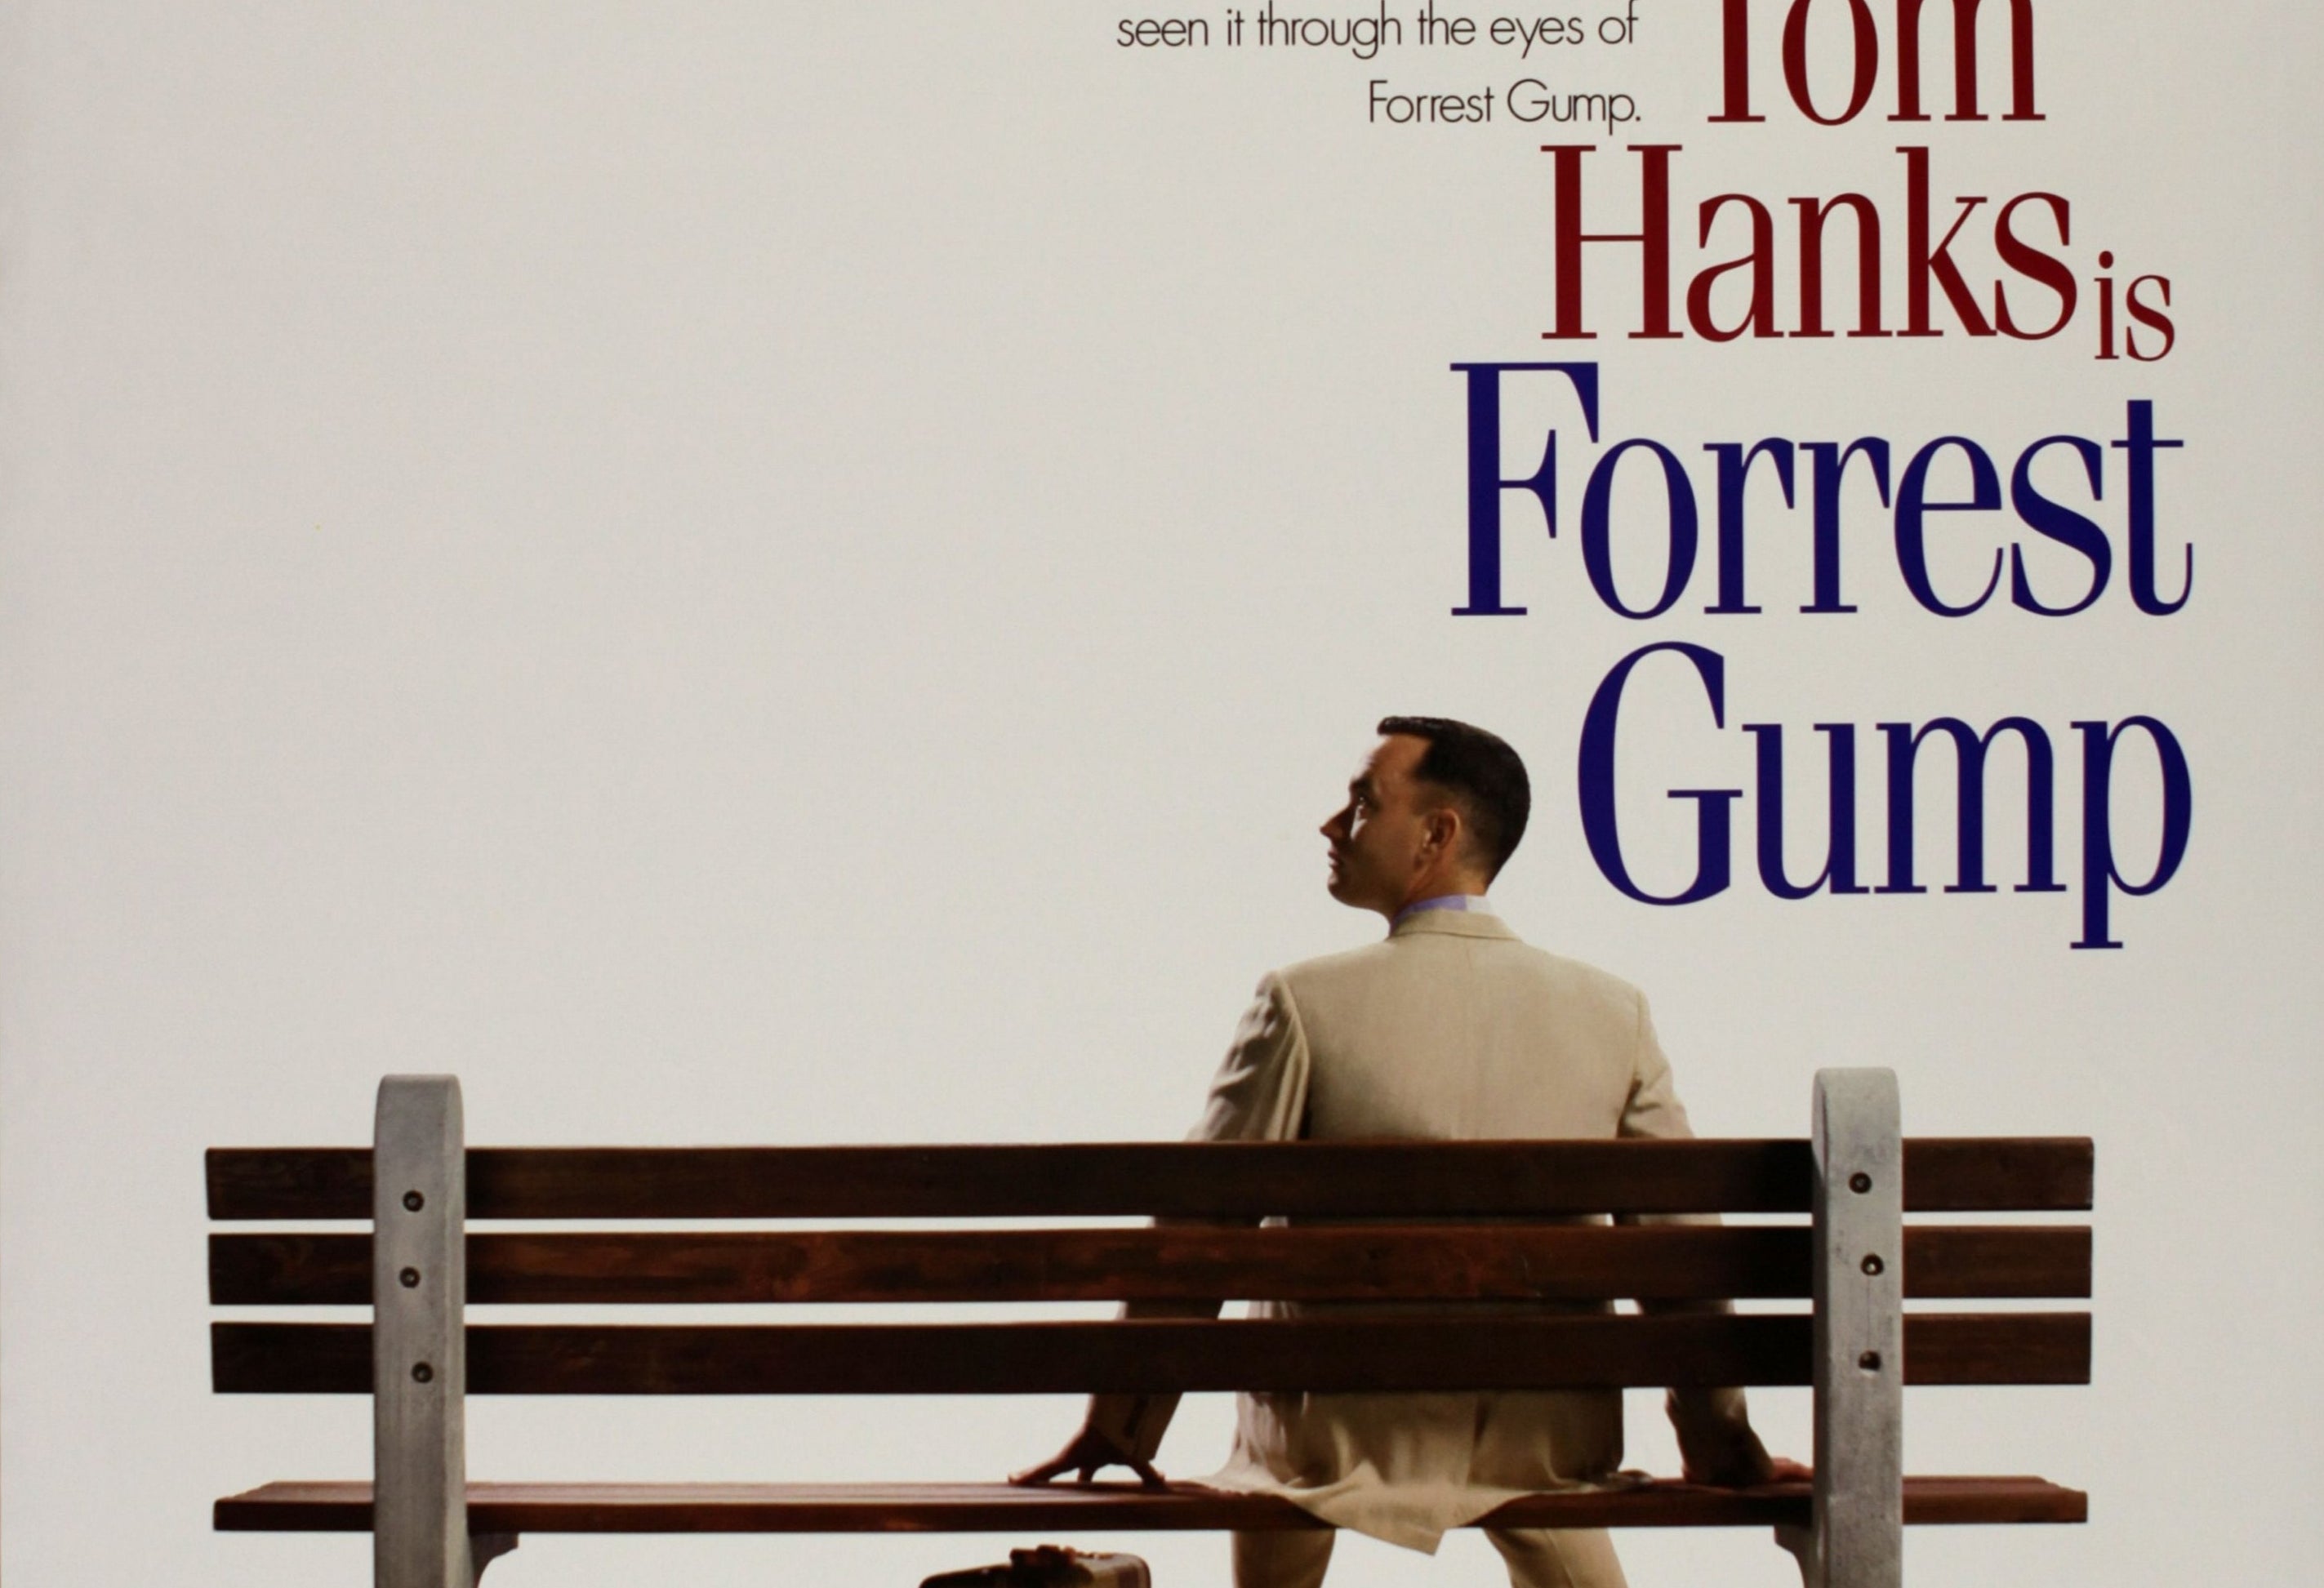 The poster for the movie Forrest Gump